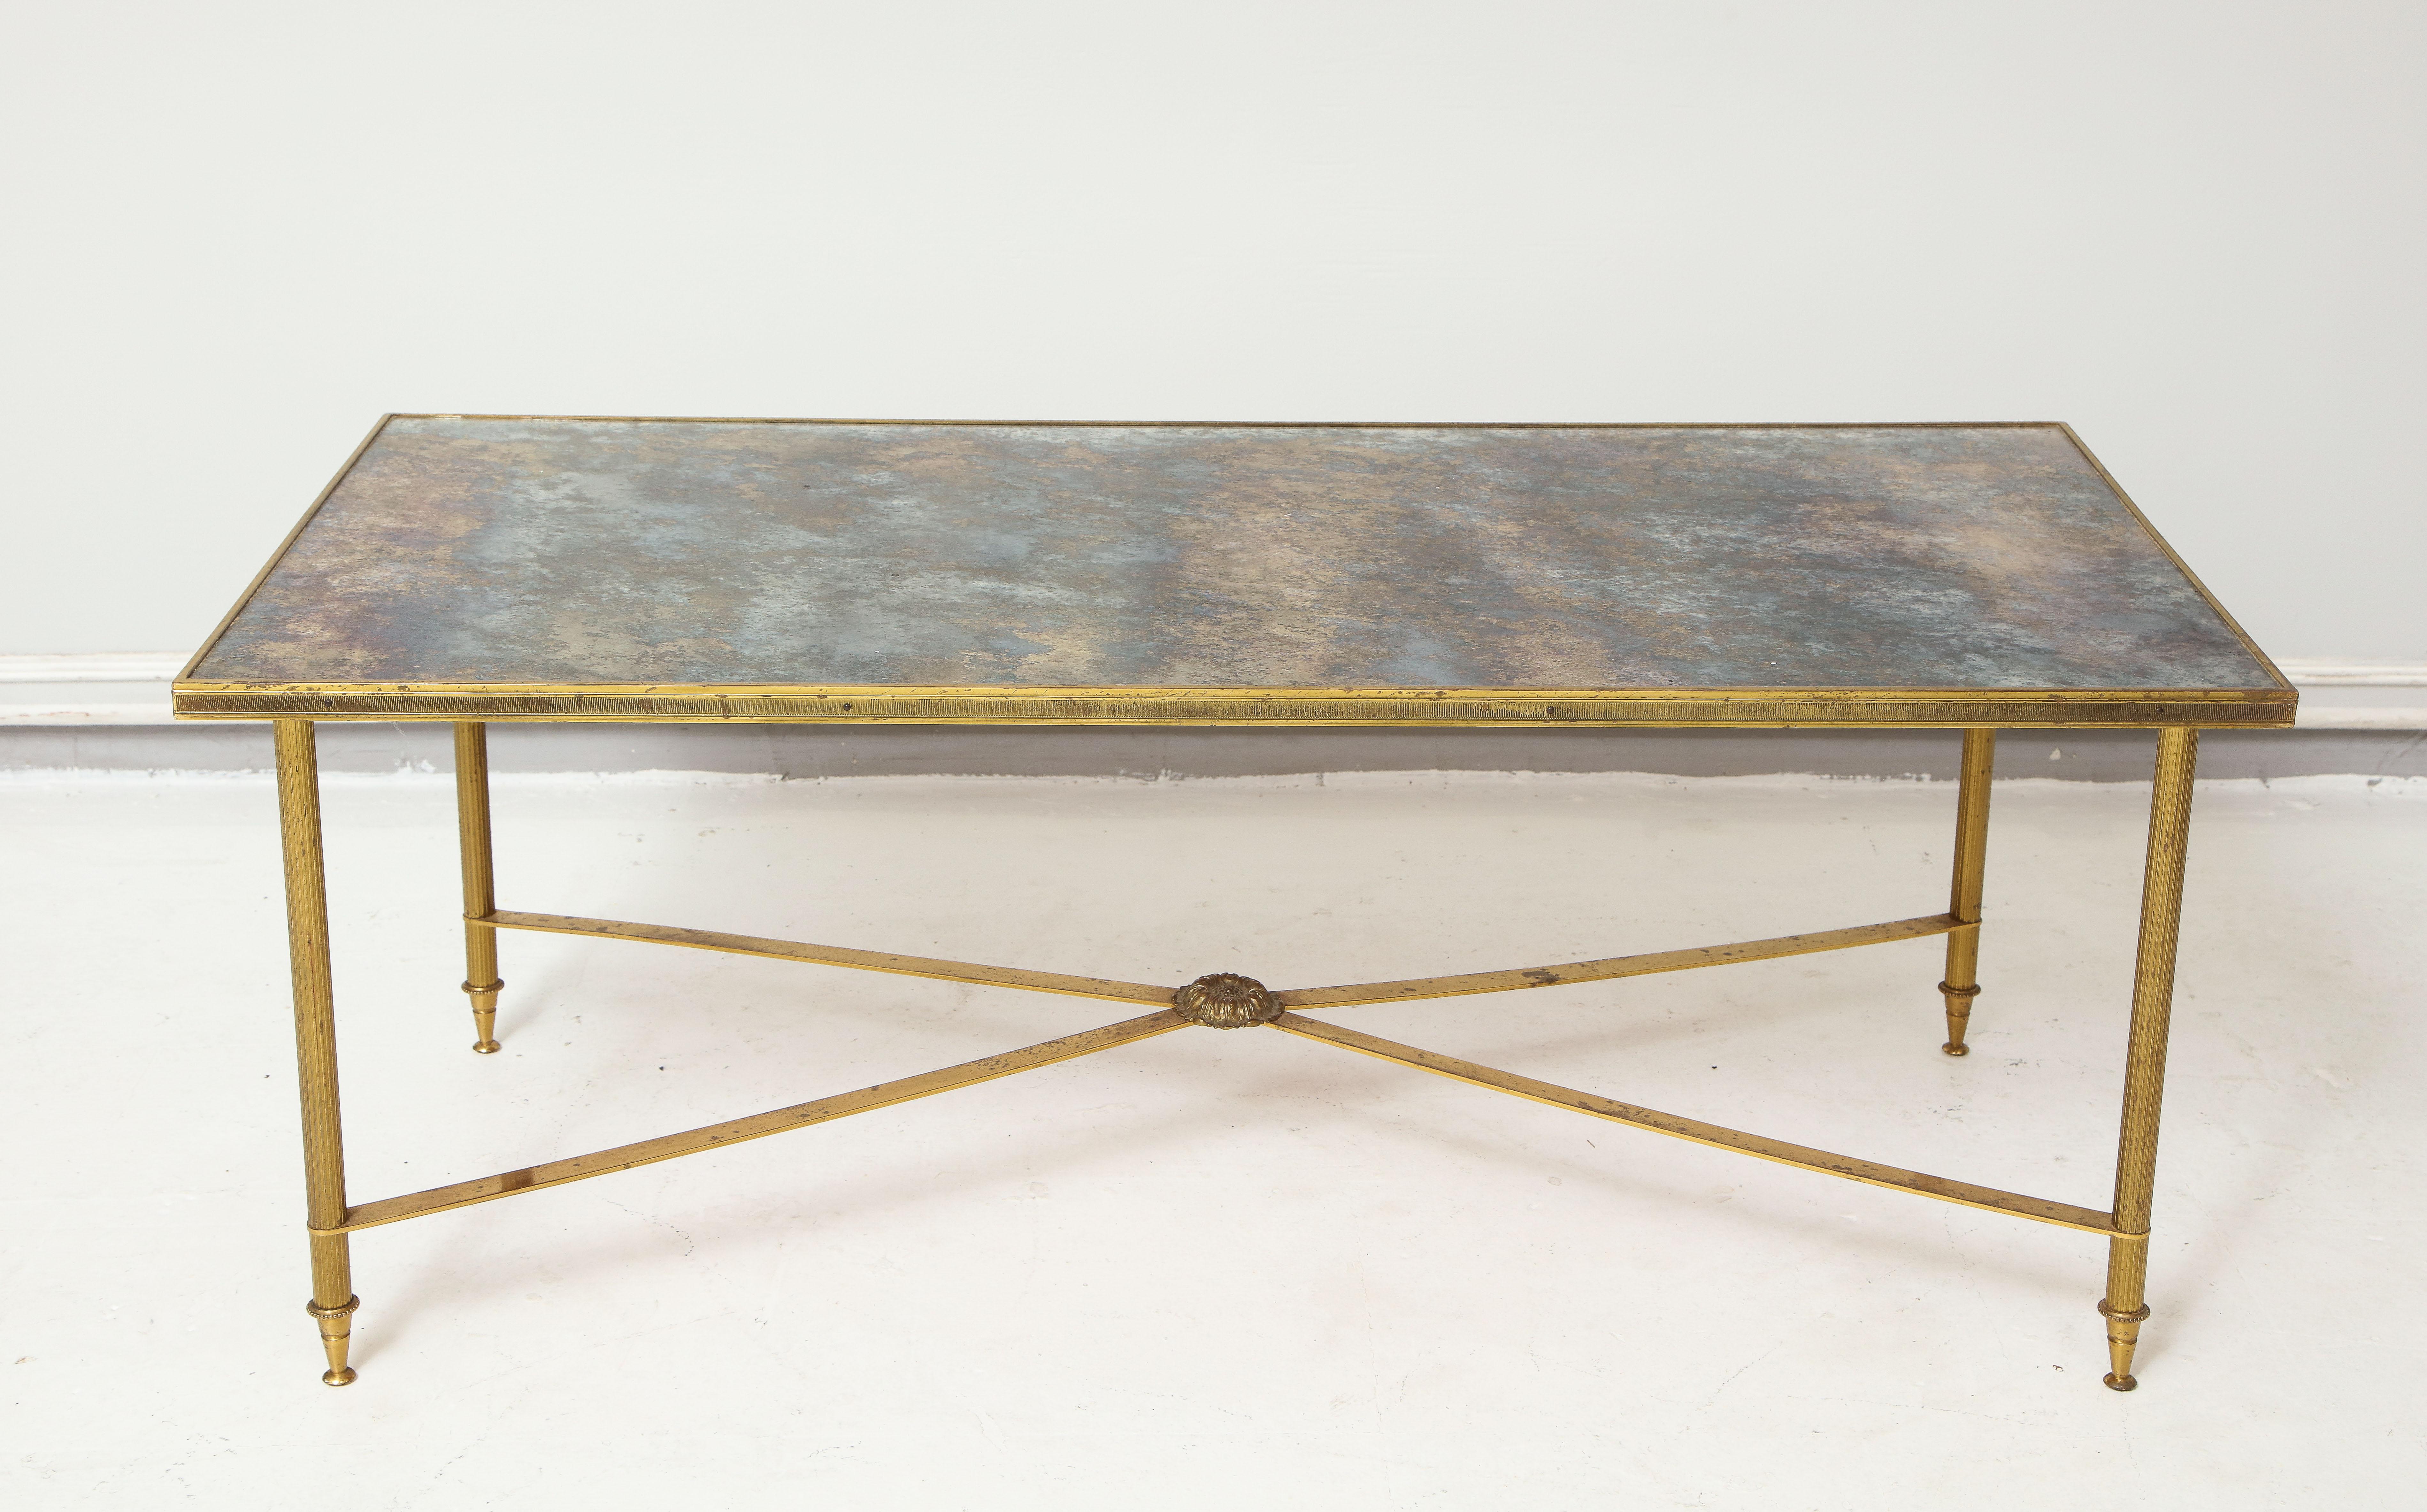 French brass Directoire style coffee table with mirrored top
Measures: Height 14.5